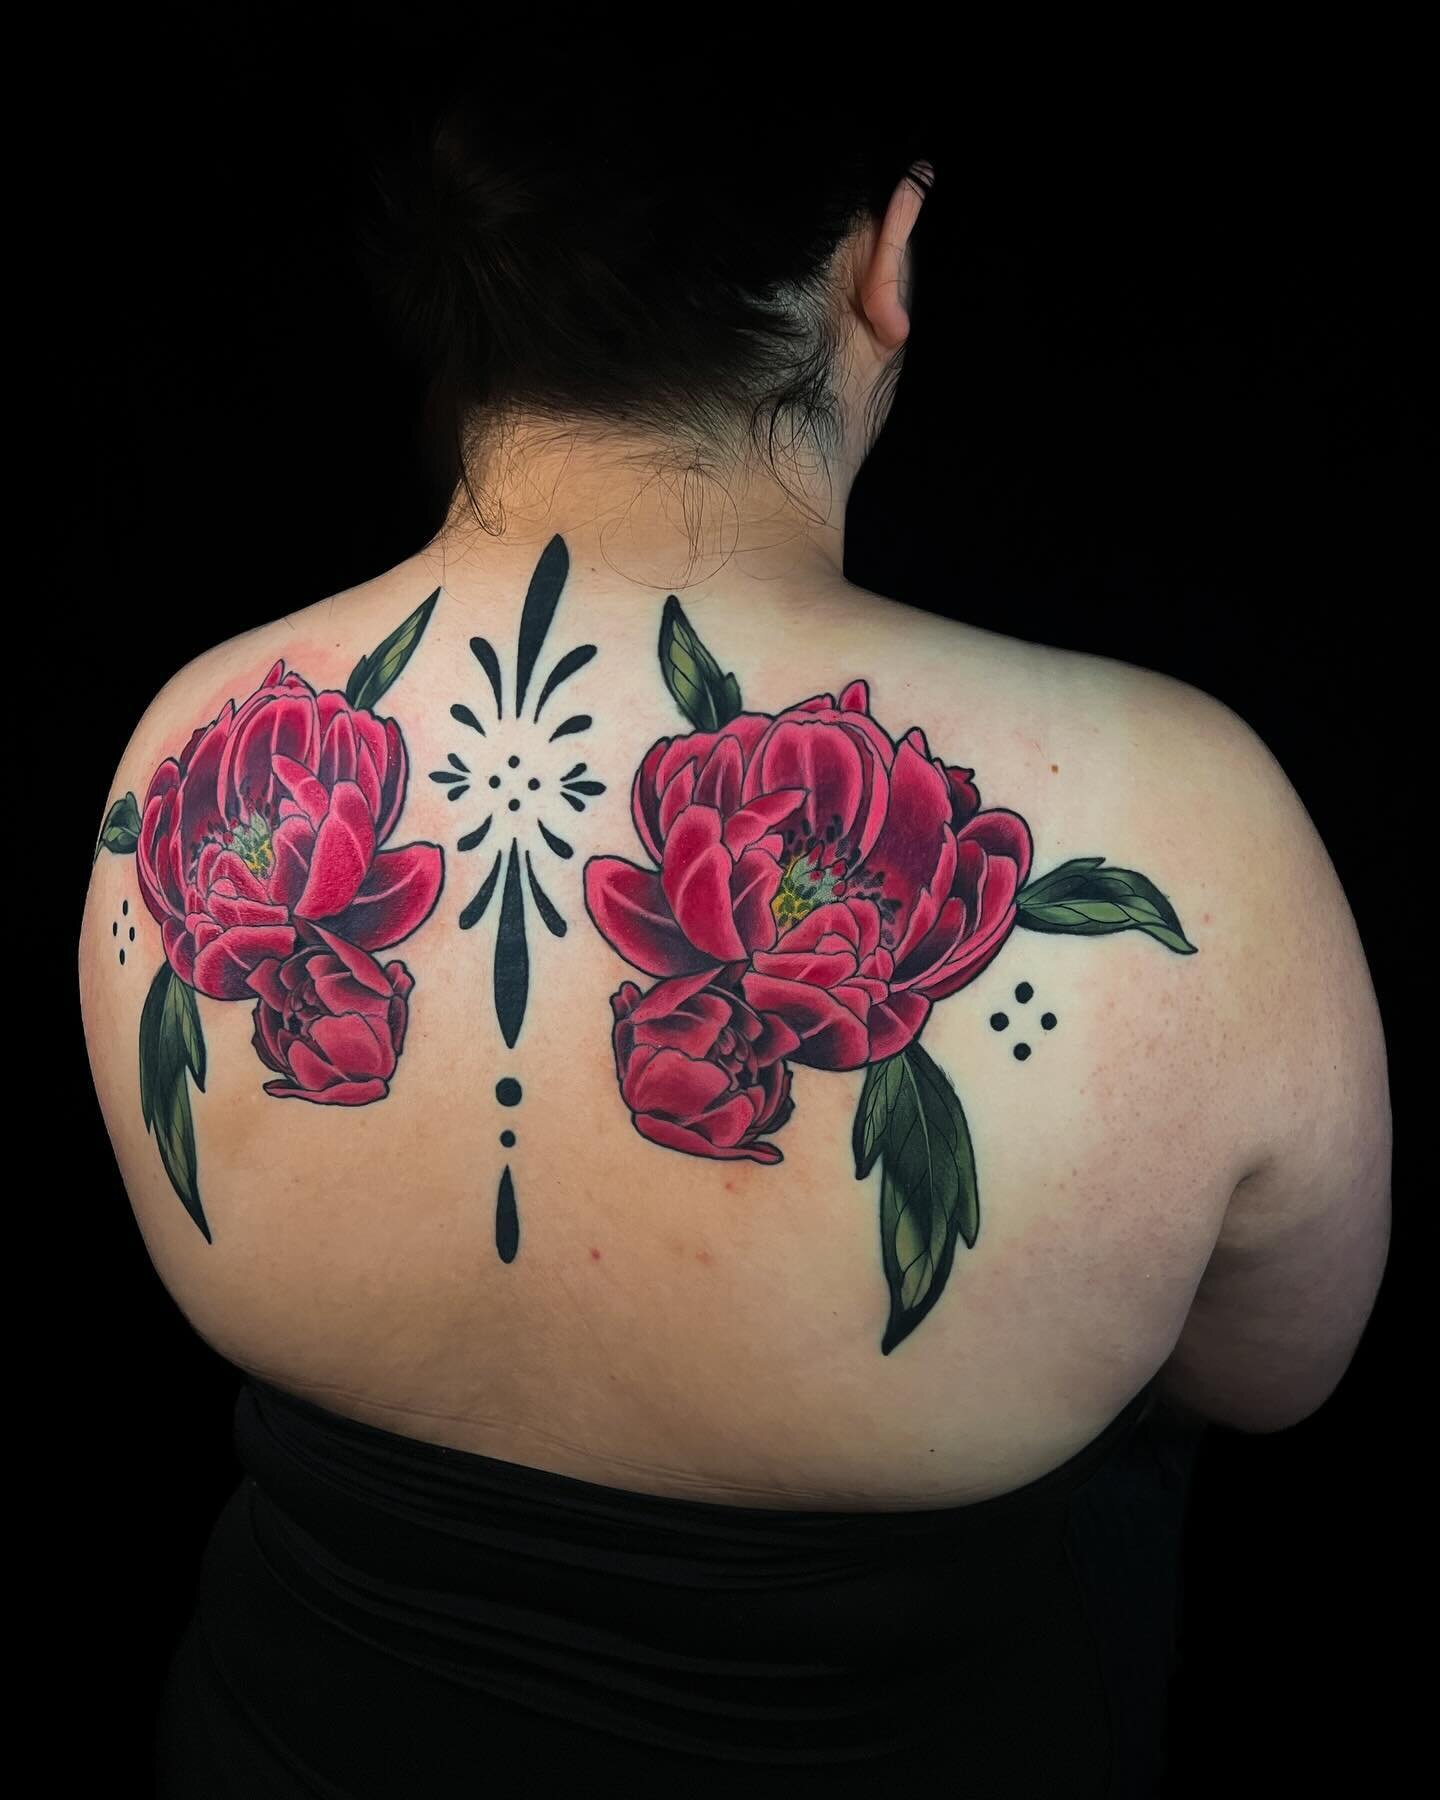 ꧁ 𝕻𝖊𝖔𝖓𝖎𝖊𝖘 ꧂
Tattooed these symmetrical peonies awhile back to match an existing sternum piece that I also tattooed on this client prior. What a fun idea! 
.
.
.
.
#ornamentaltattoo #ornamentaltattoos #symmetricaltattoo #floraltattoo #floraltat